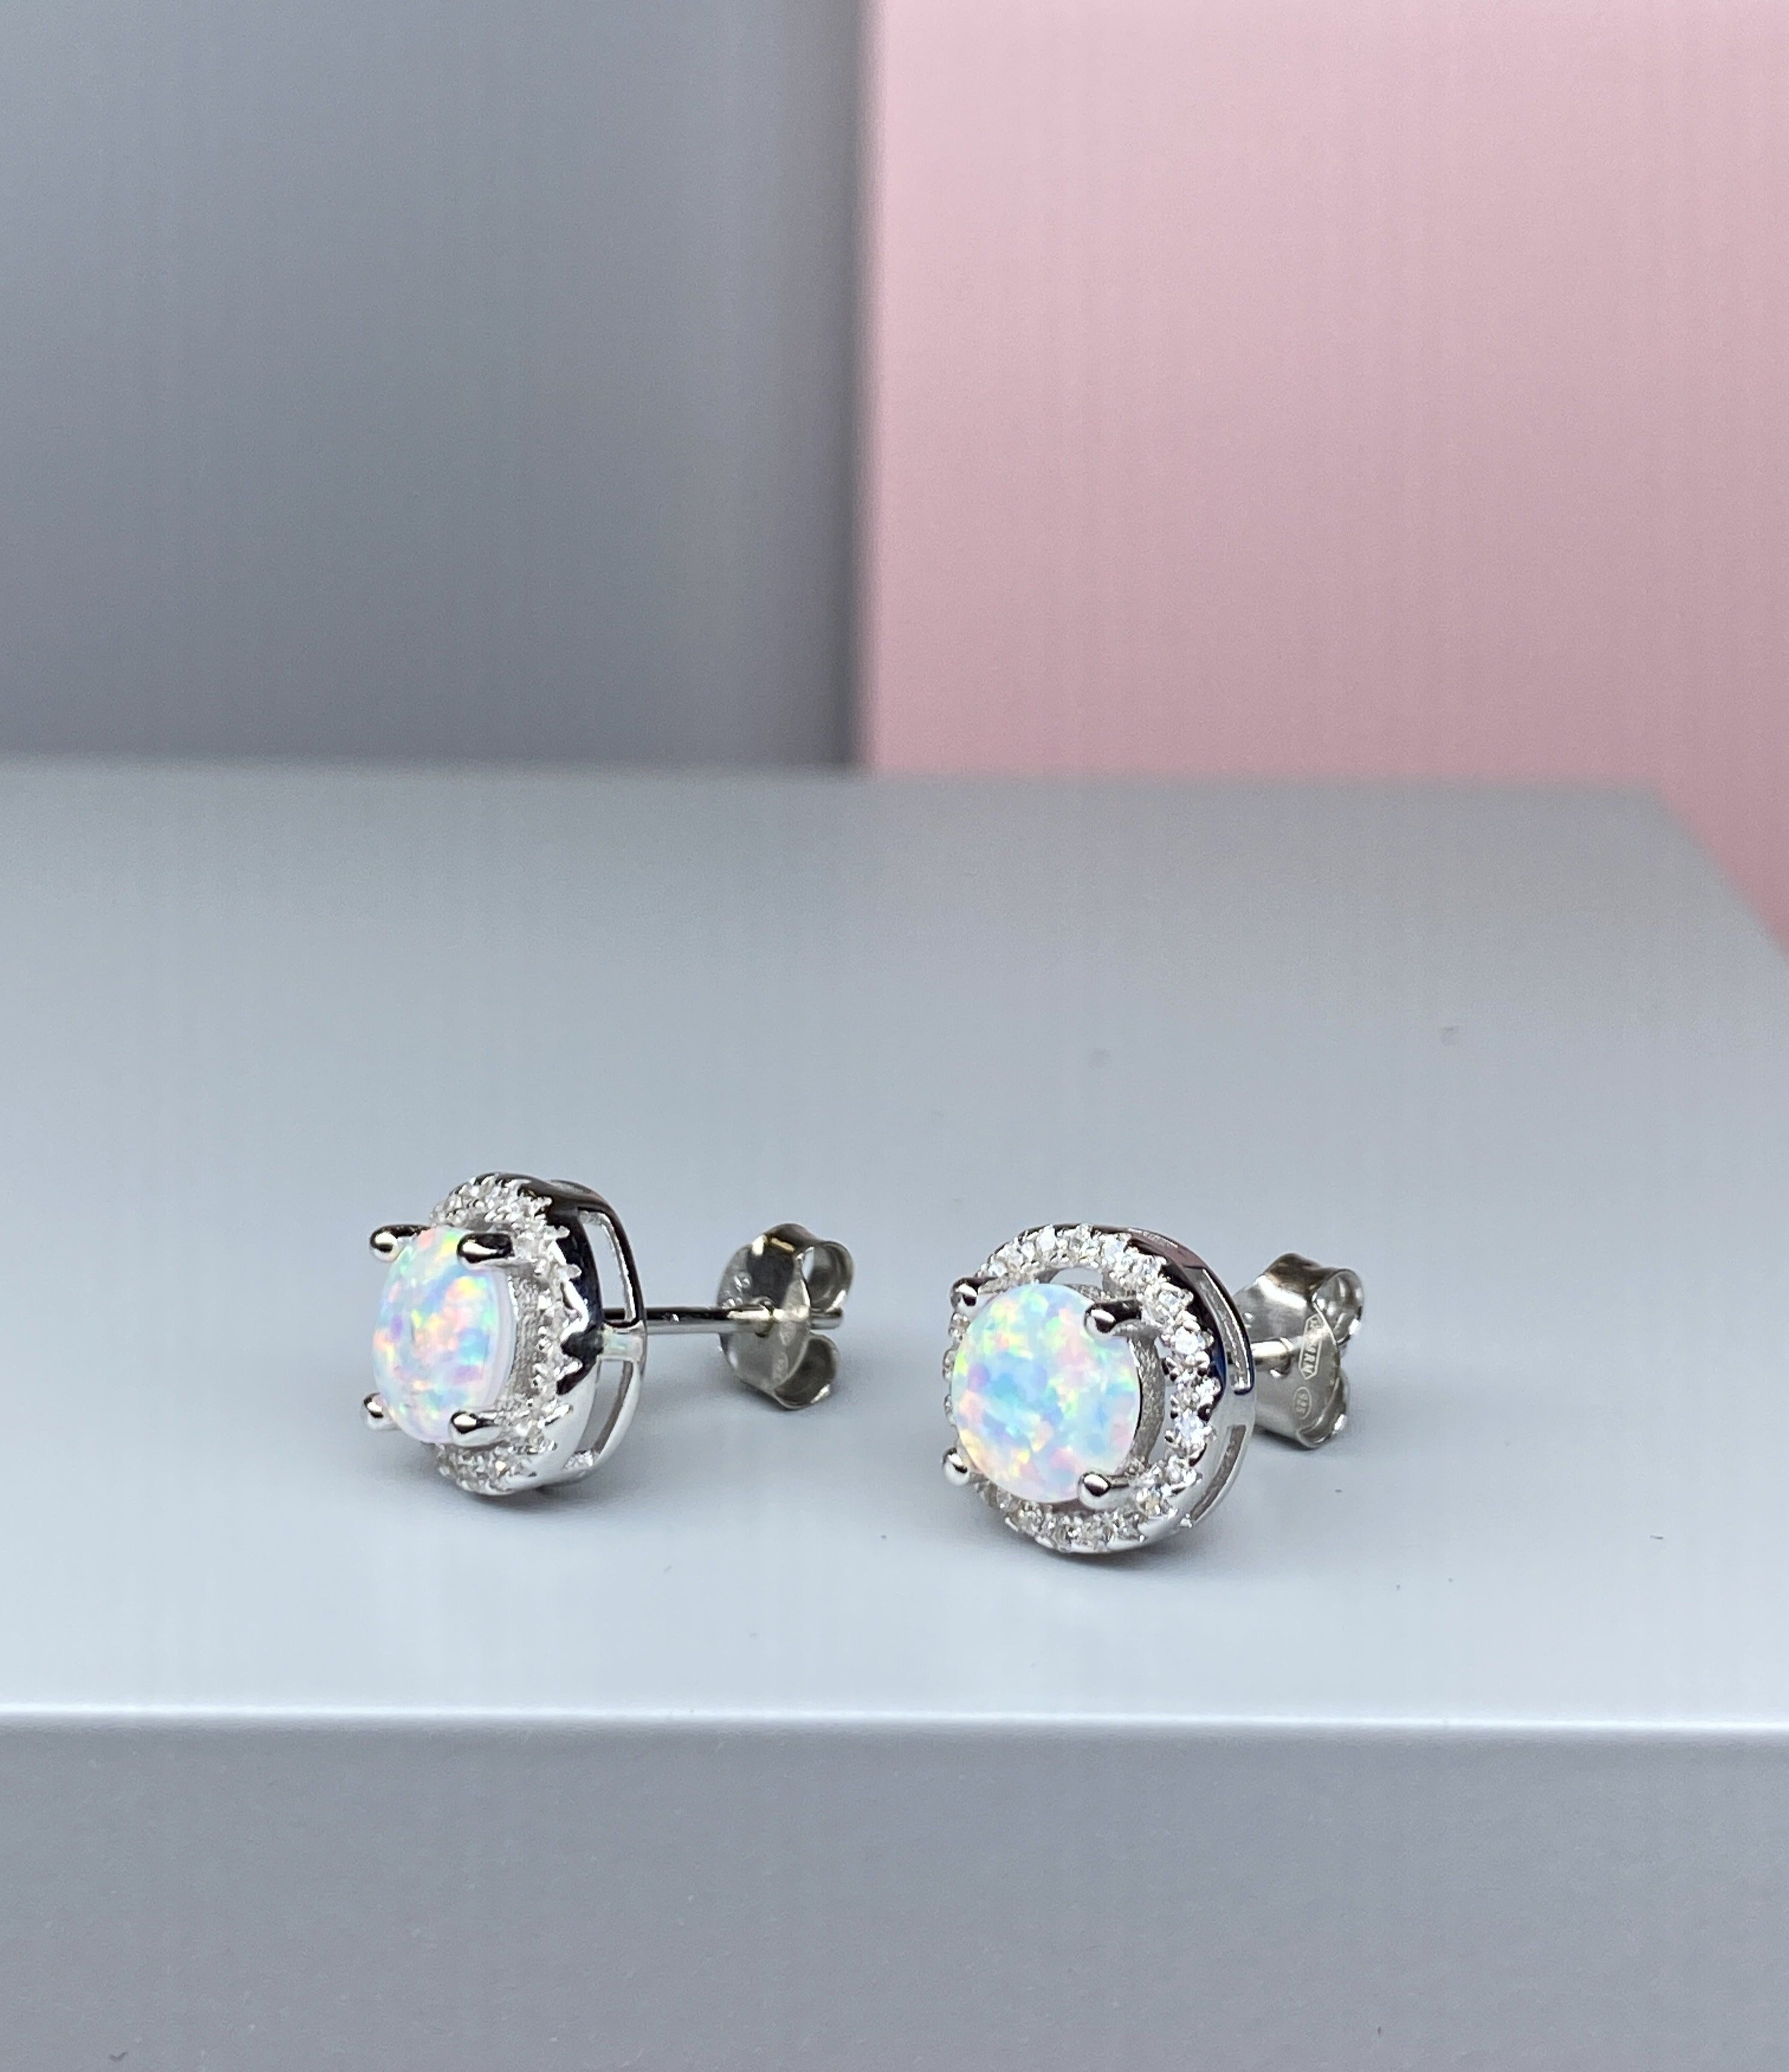 Sterling Silver Opal Halo Earrings - Hallmark Jewellers Formby & The Jewellers Bench Widnes